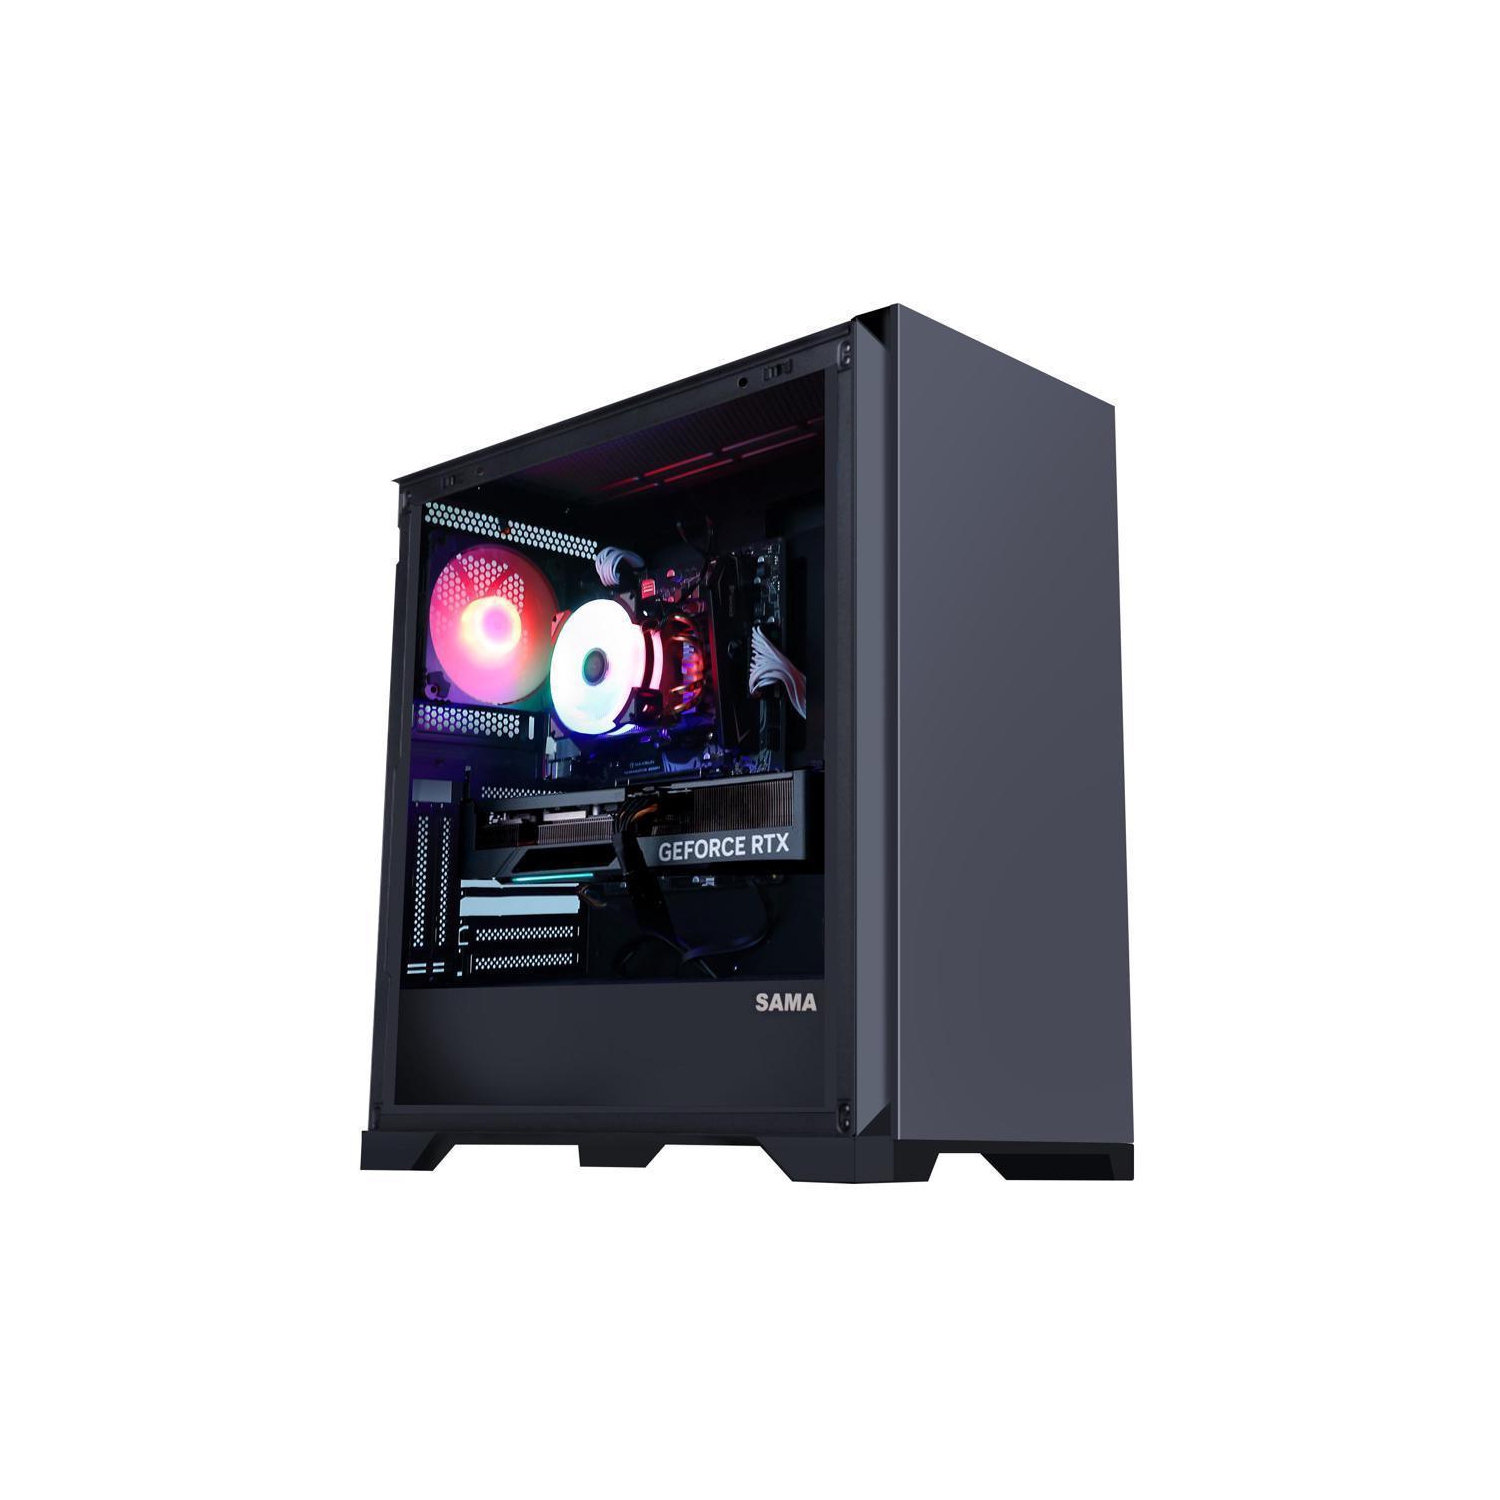 Hoengager Ares Gaming - Intel Core i5-12600K 10-Core 3.7GHz-NVIDIA GeForce RTX 3060 Ti- 16GB DDR4 3200MHz -500GB M.2 + 2TB 2.5'' SATA SSD- WIFI -RGB Fans - Windows 11 Pro Computer